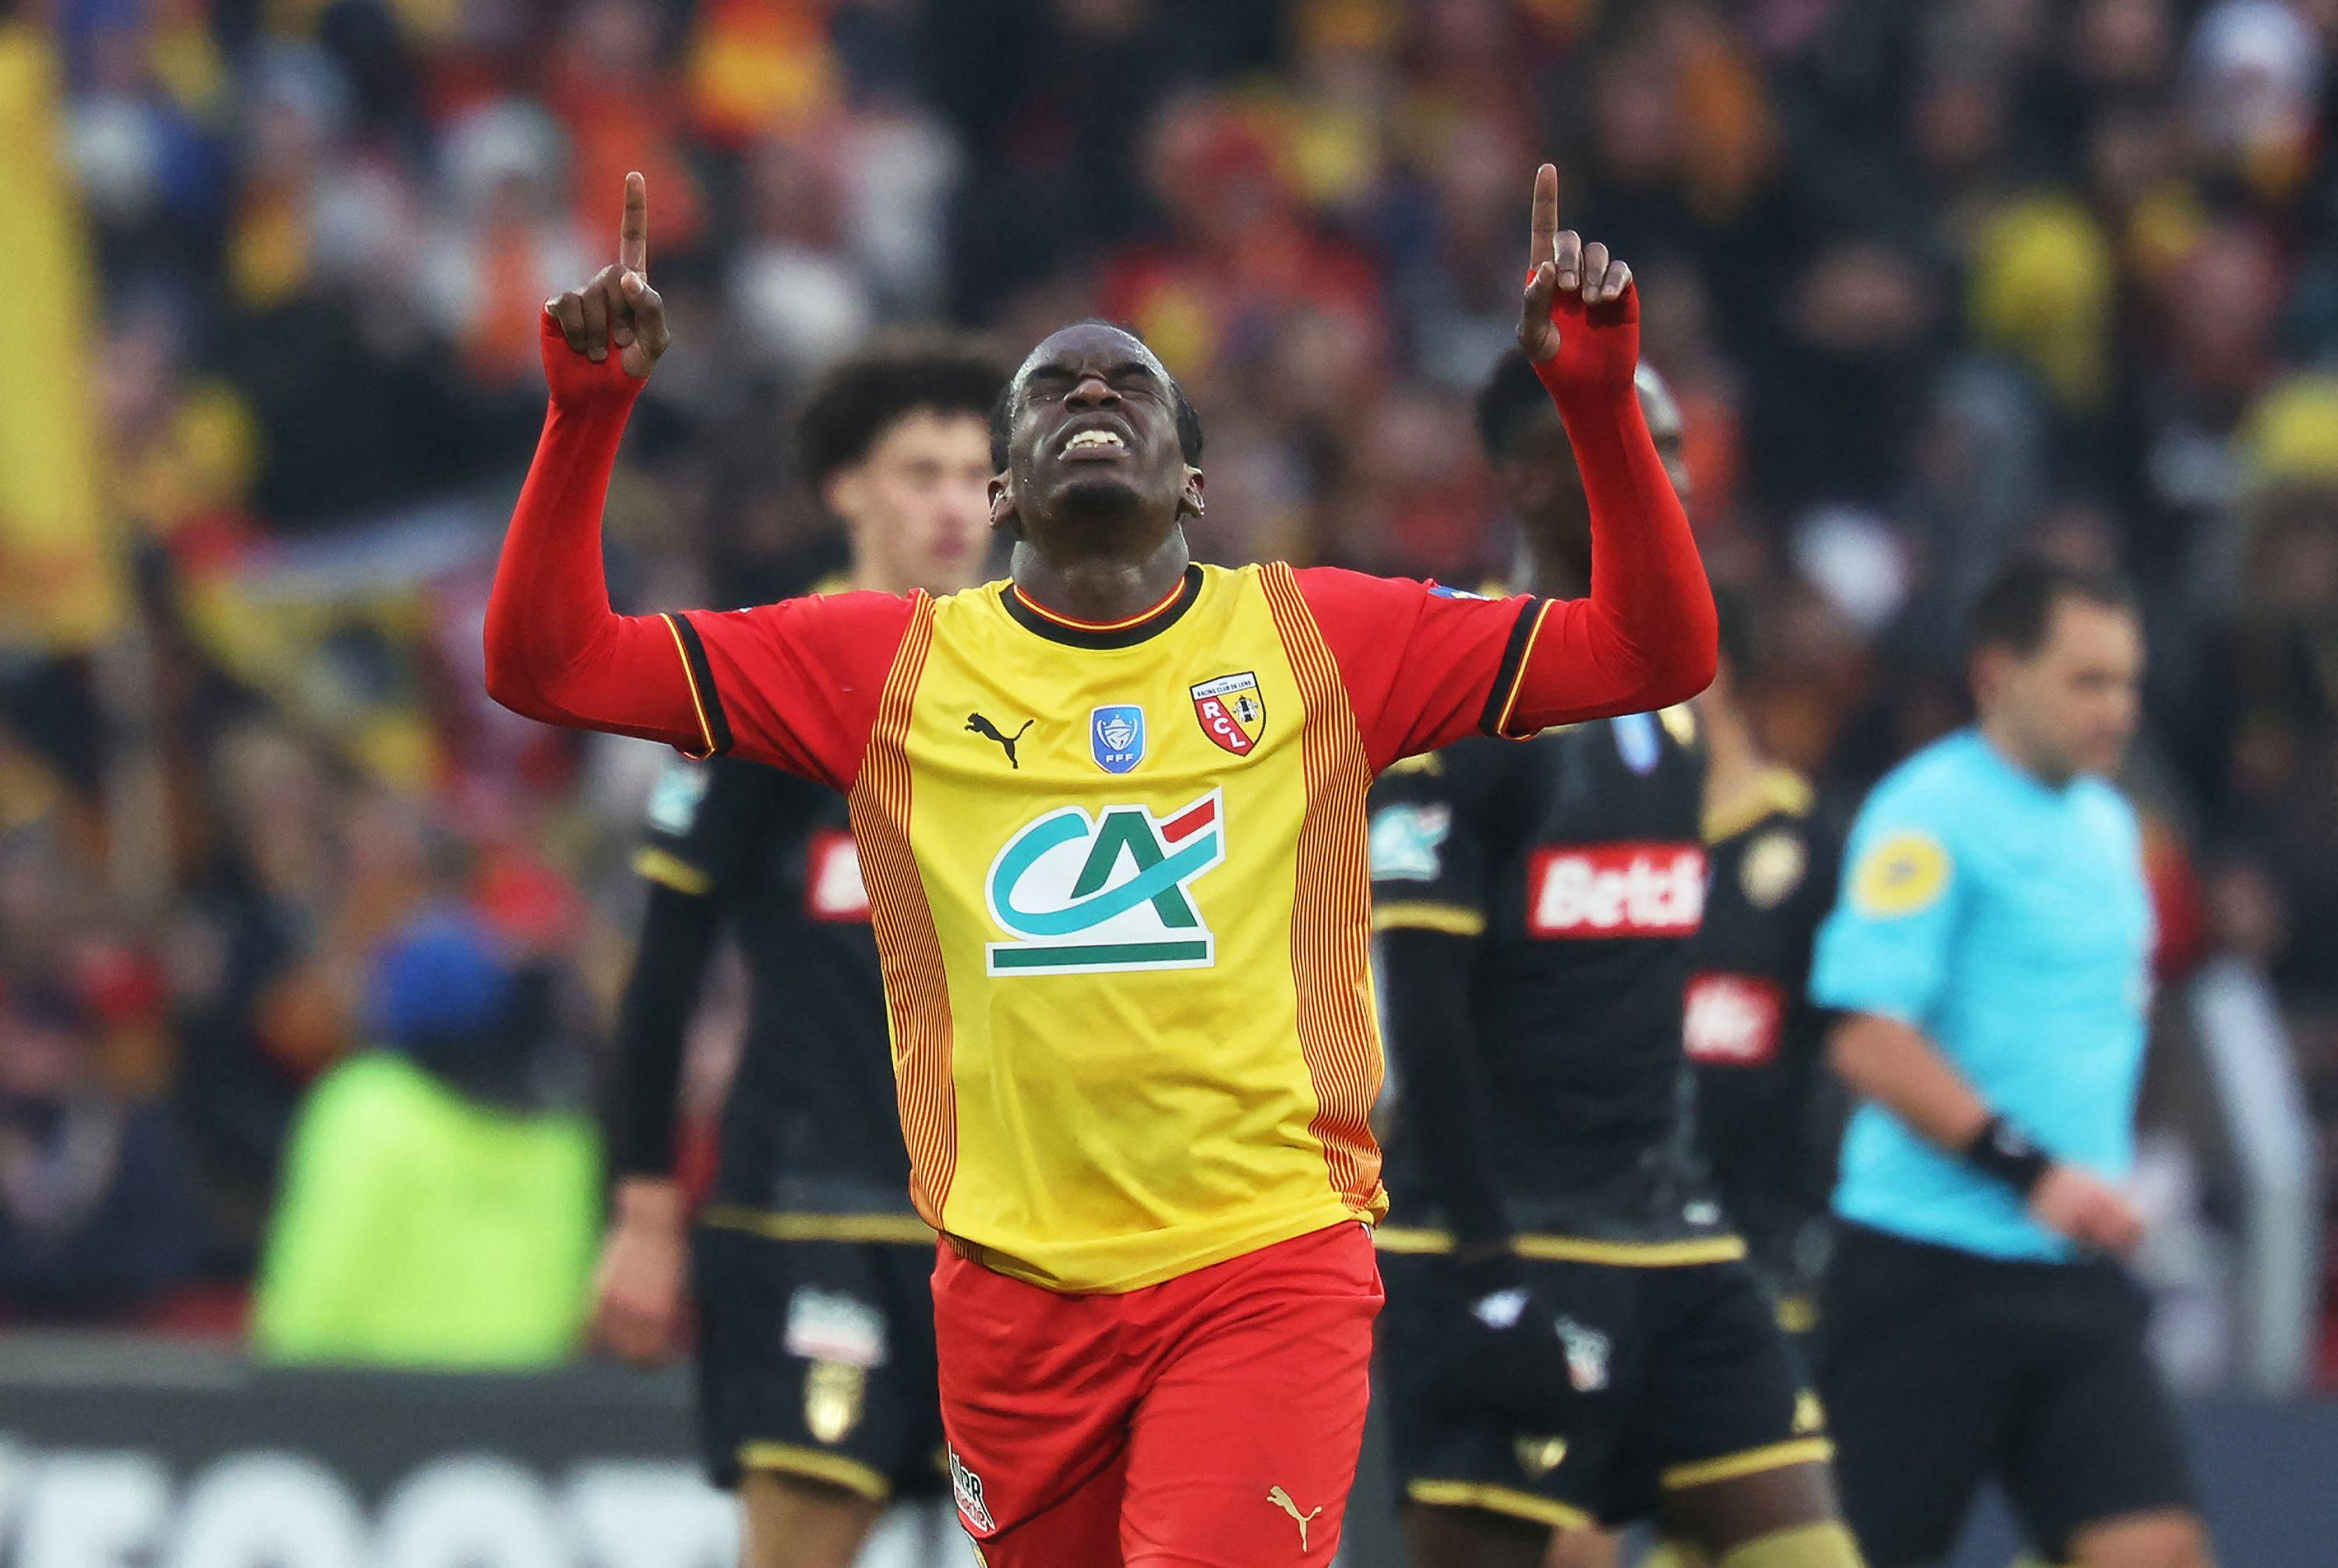 Mercato: loaned to RC Lens, Faitout Maouassa returns to Bruges